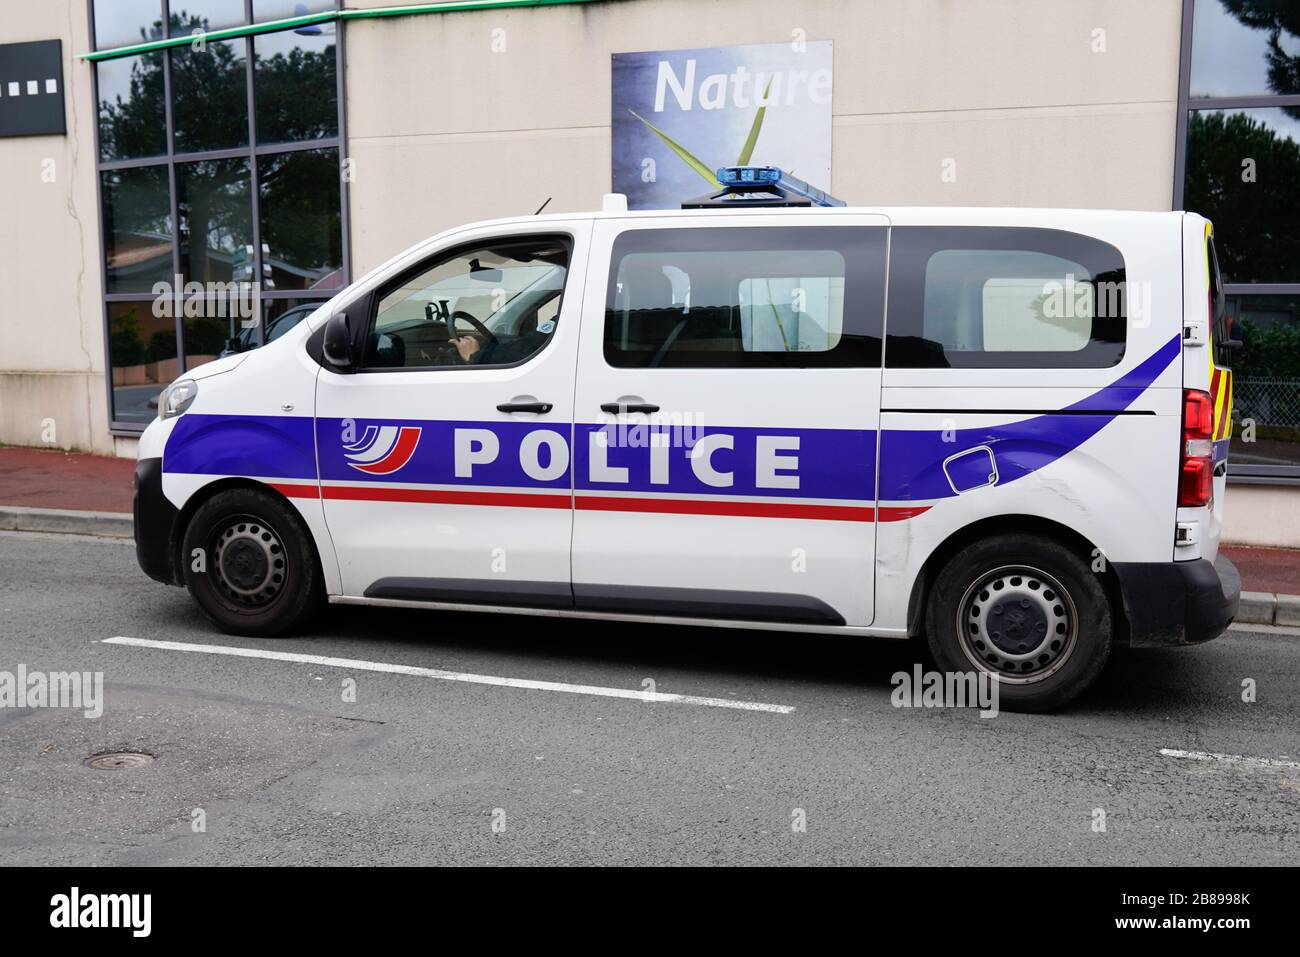 Bordeaux , Aquitaine / France - 03 15 2020 : police nationale van truck  sign logo sticker on car means national police in french Stock Photo - Alamy